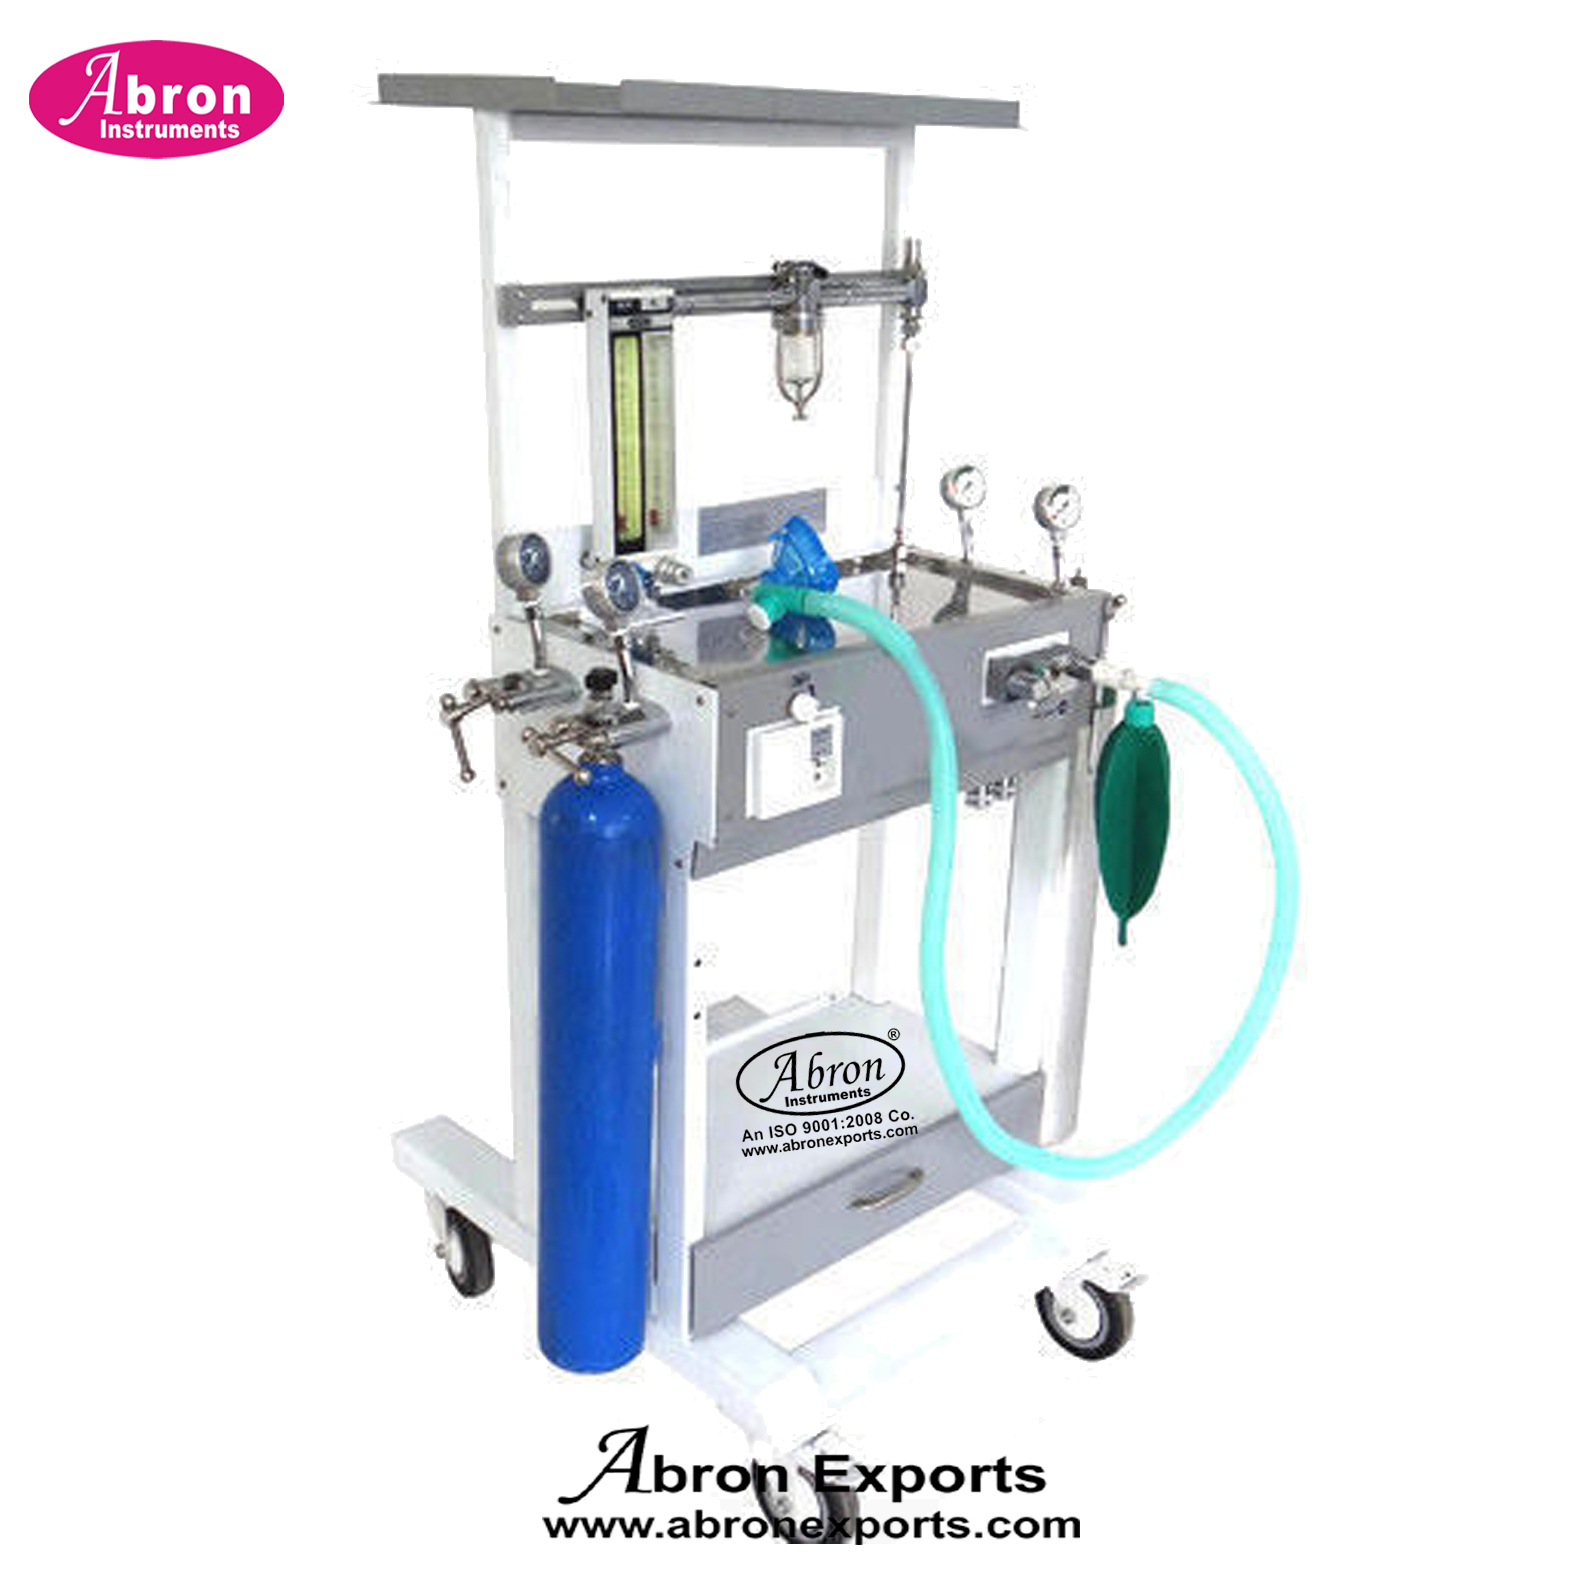 Anaesthesia Machine Work Station Portable With Oxygen Cylinder Sterlization OT Room Operation Theater ICU Laboratory etc Abron ABM-1120WST 